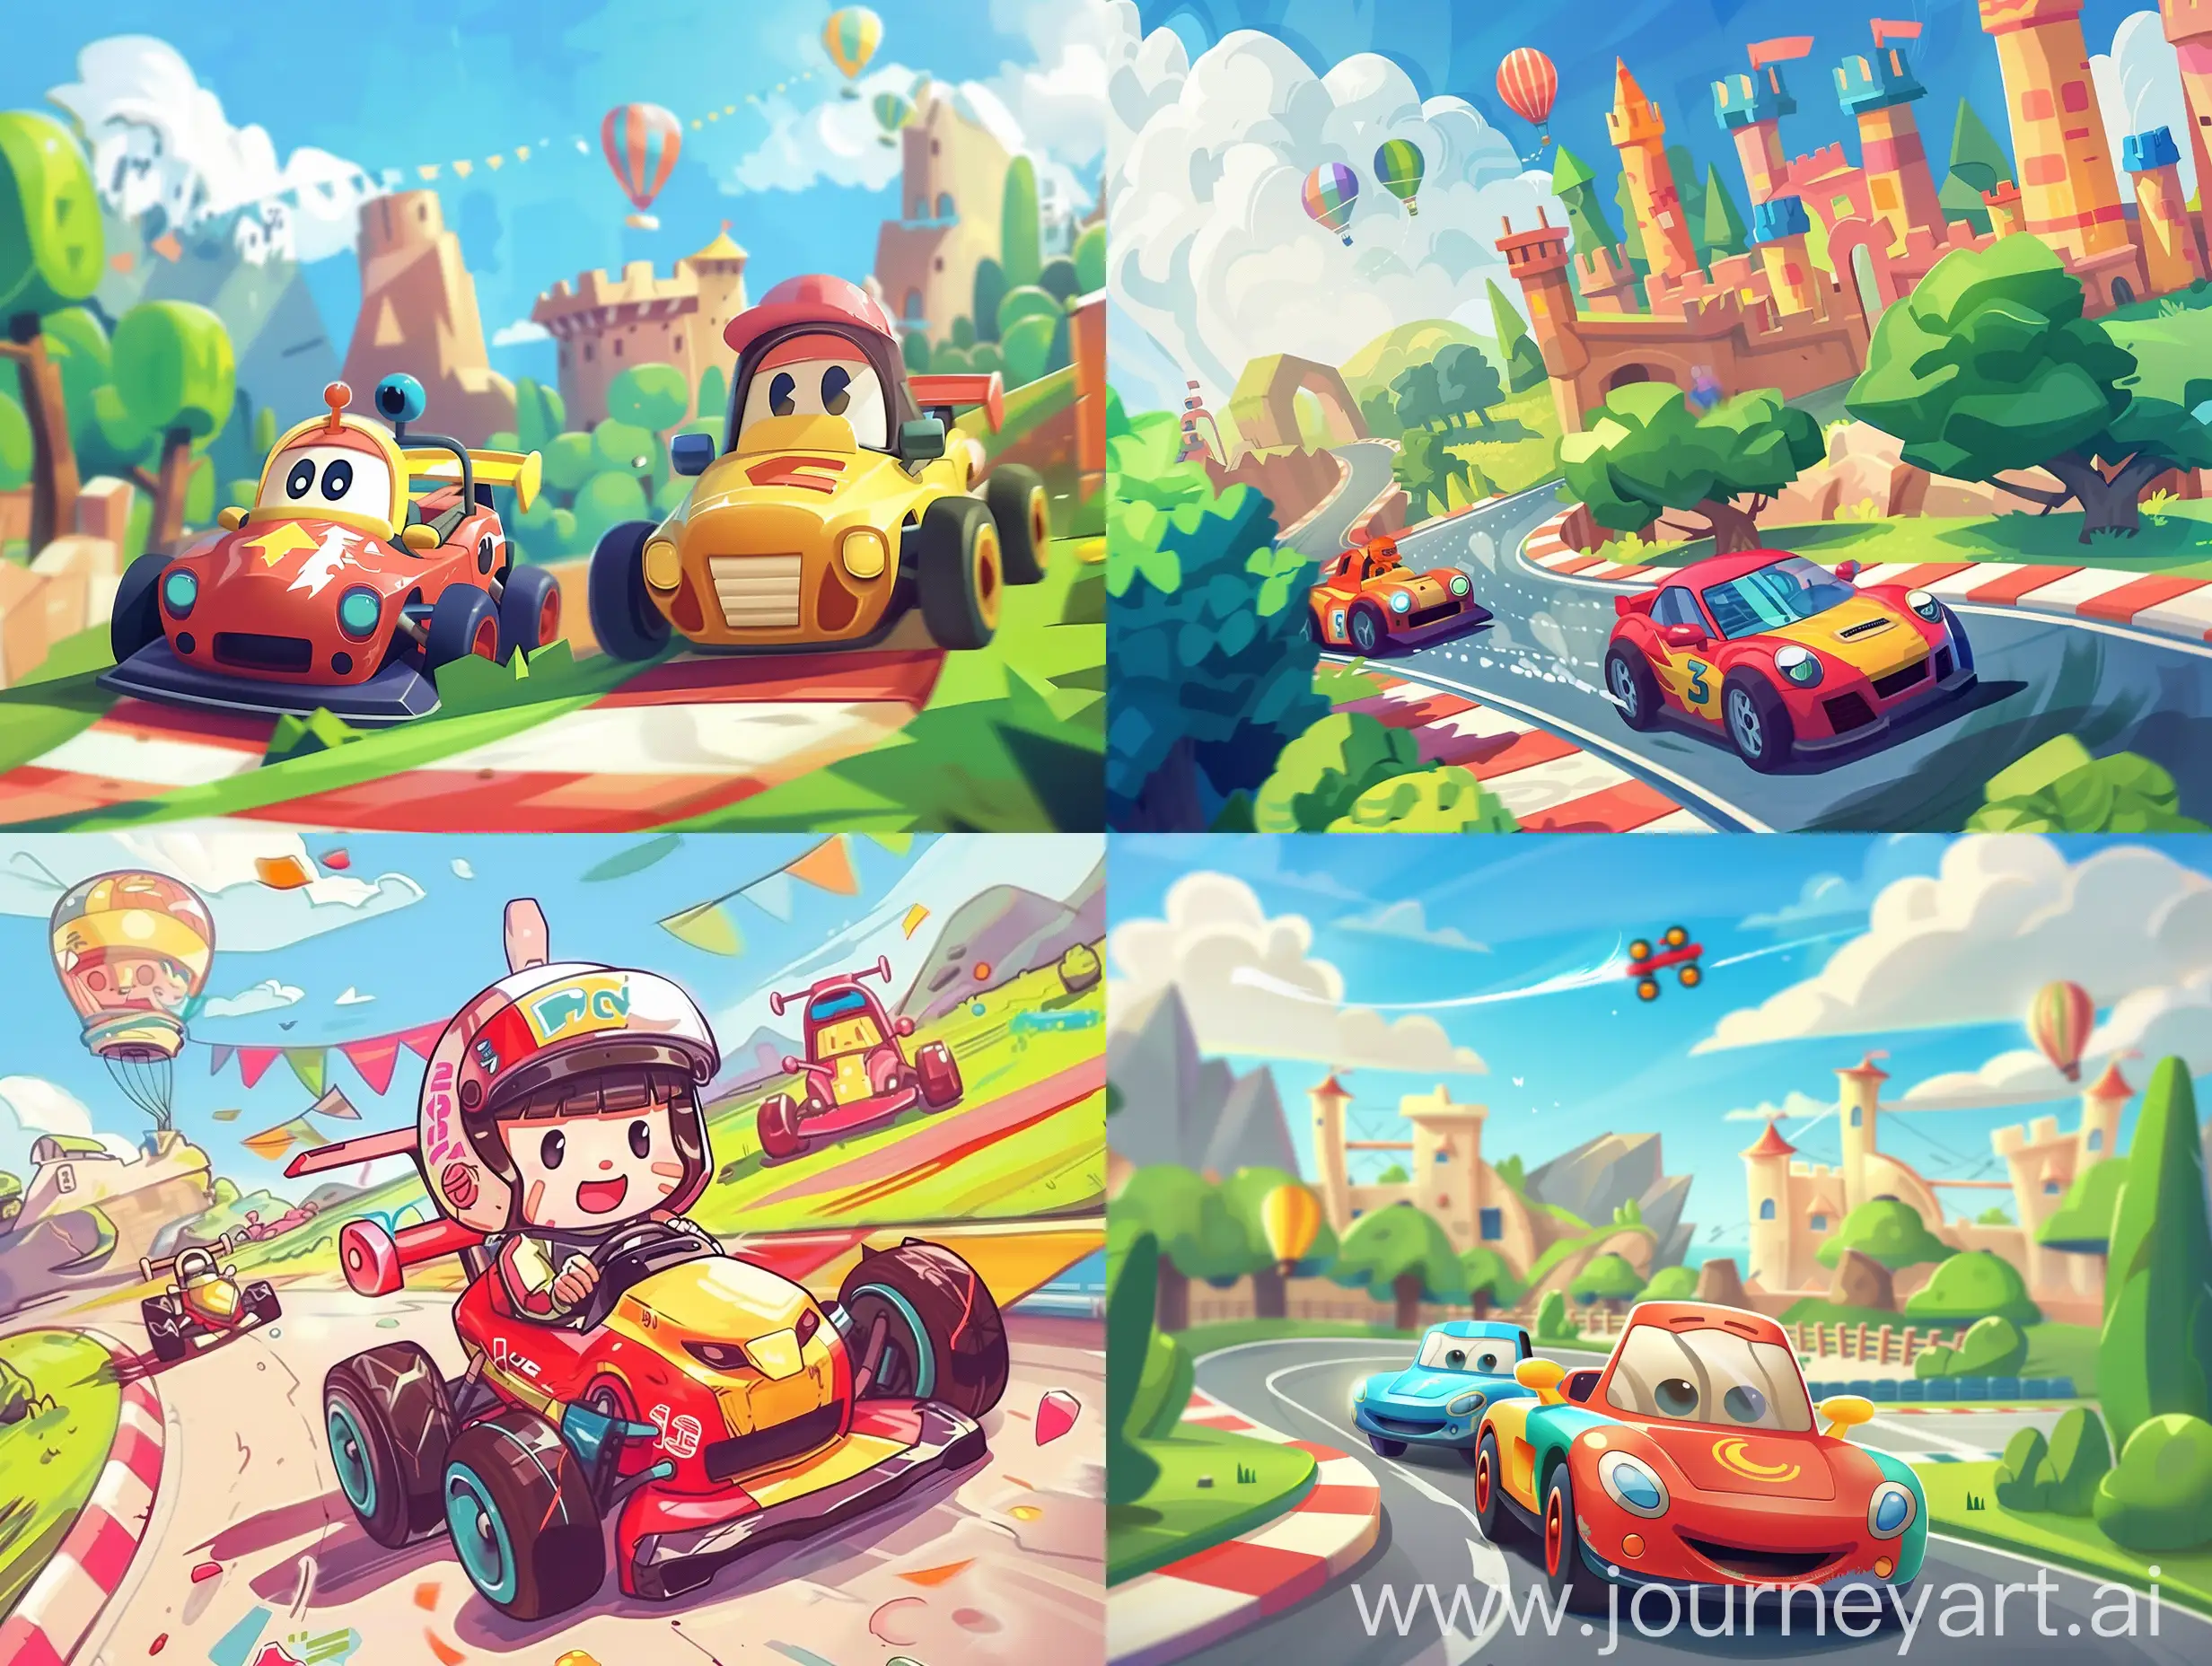 Cute, childish cover for a 2D racing game